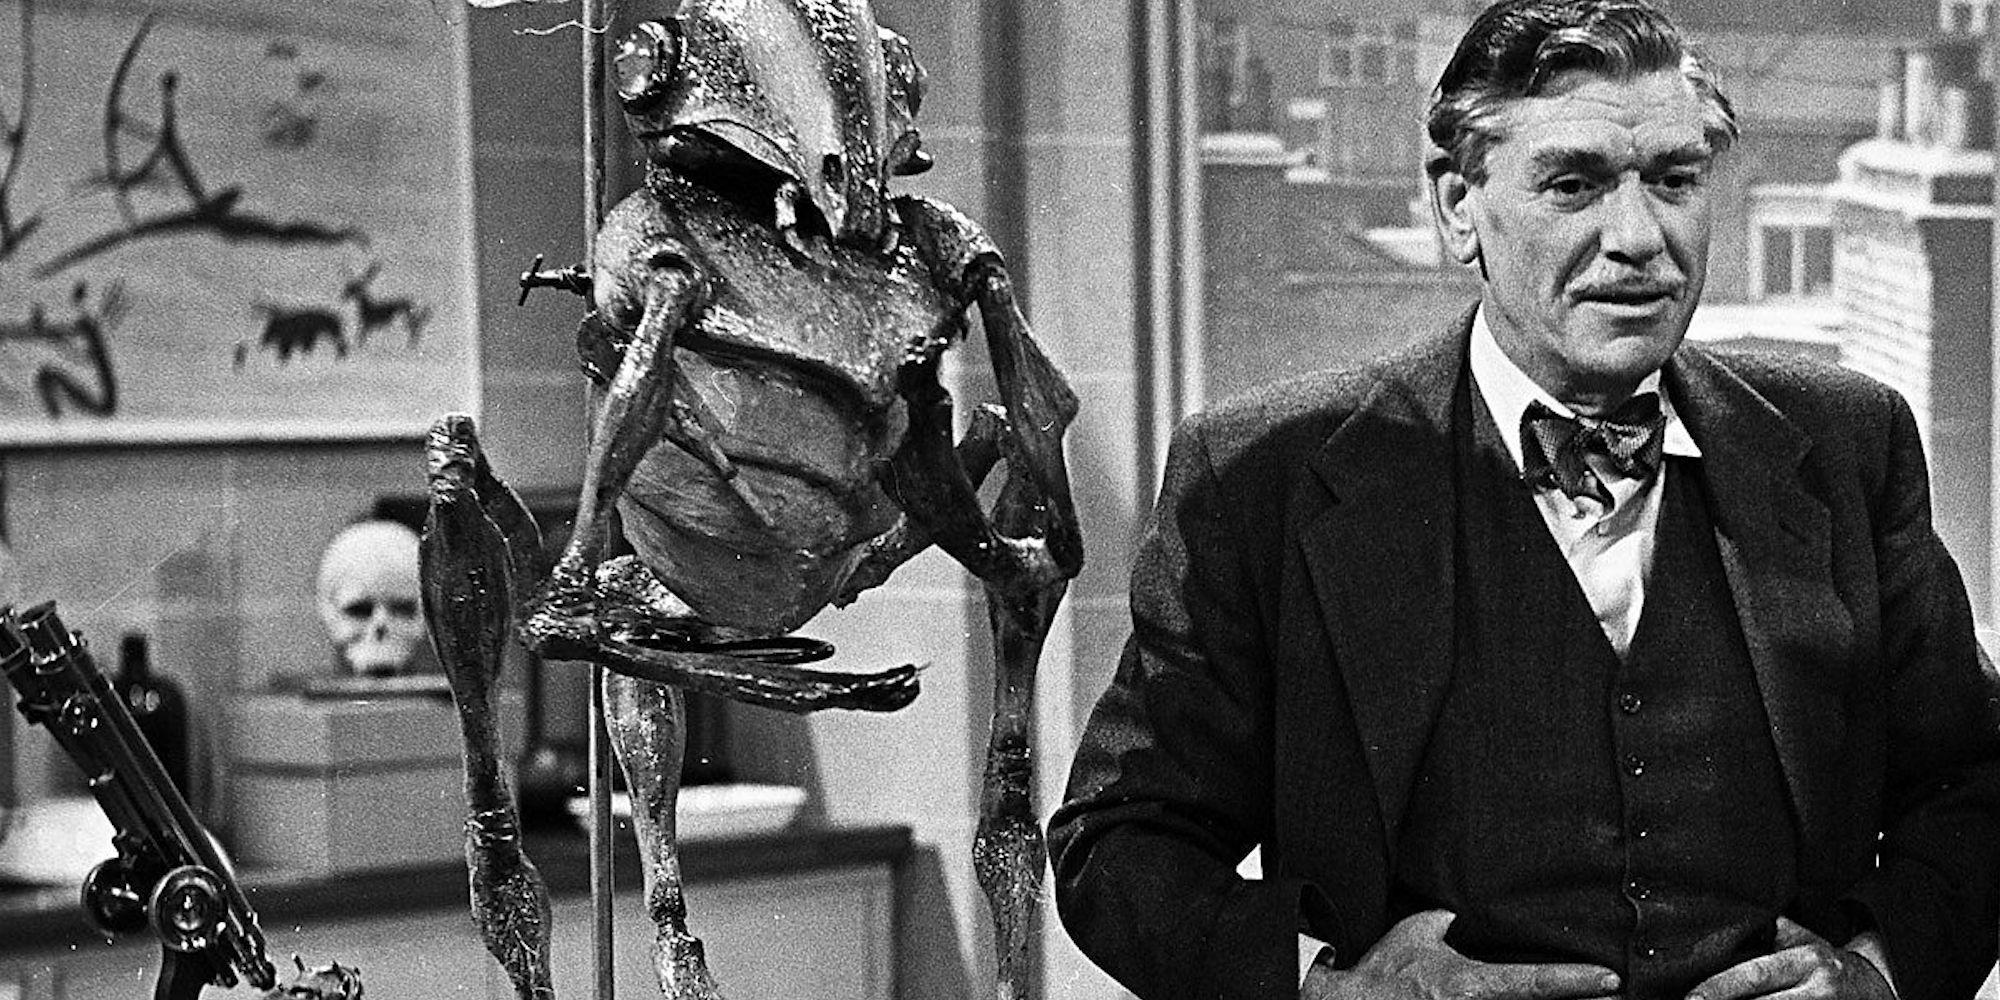 quatermass and the pit0